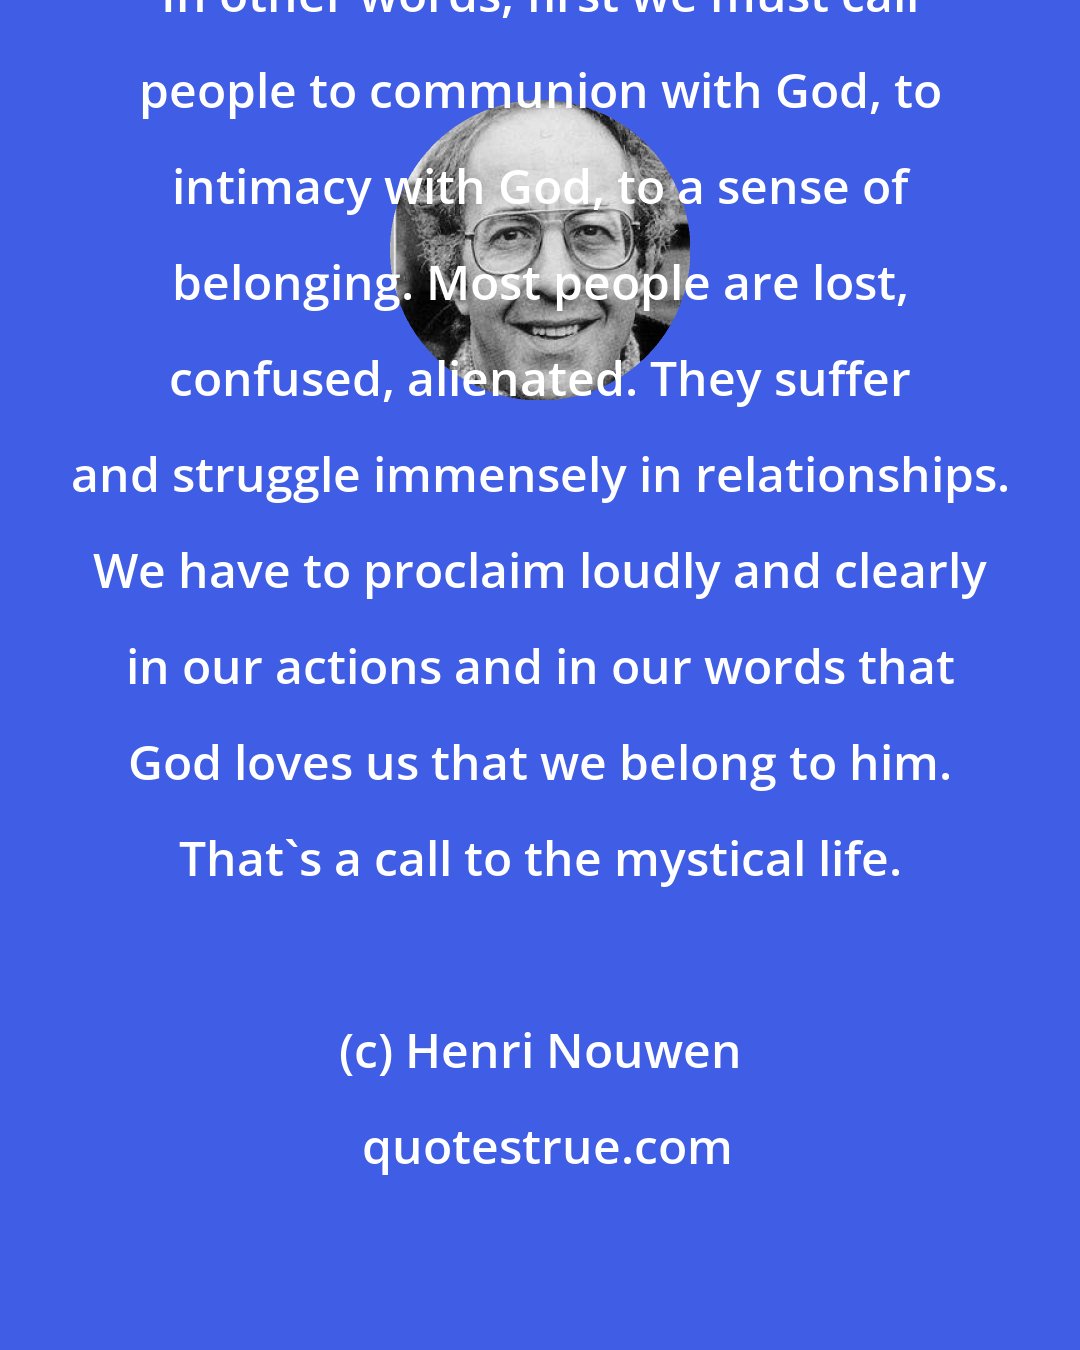 Henri Nouwen: In other words, first we must call people to communion with God, to intimacy with God, to a sense of belonging. Most people are lost, confused, alienated. They suffer and struggle immensely in relationships. We have to proclaim loudly and clearly in our actions and in our words that God loves us that we belong to him. That's a call to the mystical life.